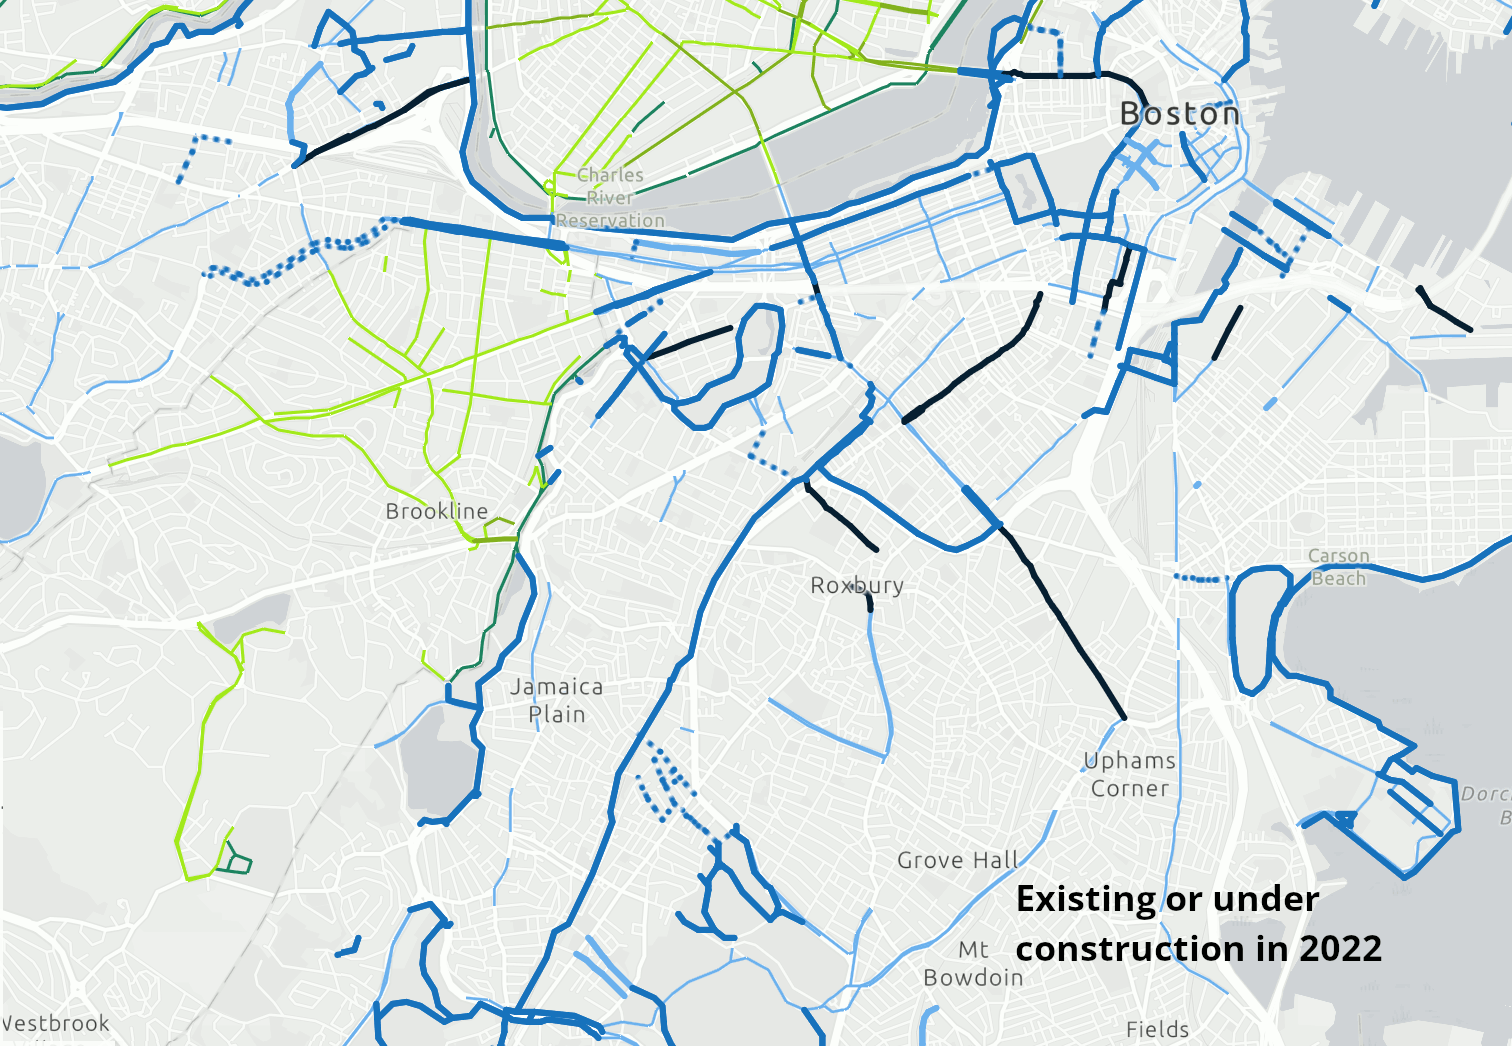 A map of Boston's current bike network and new infrastructure announced by the Wu administration on Tuesday. Bold orange lines indicate new protected bike lanes and yellow lines indicate new contraflow bike lanes on one-way streets. Dark blue lines indicate protected bike lane projects already in progress, including Tremont Street in the South End and Ruggles Street in Roxbury.